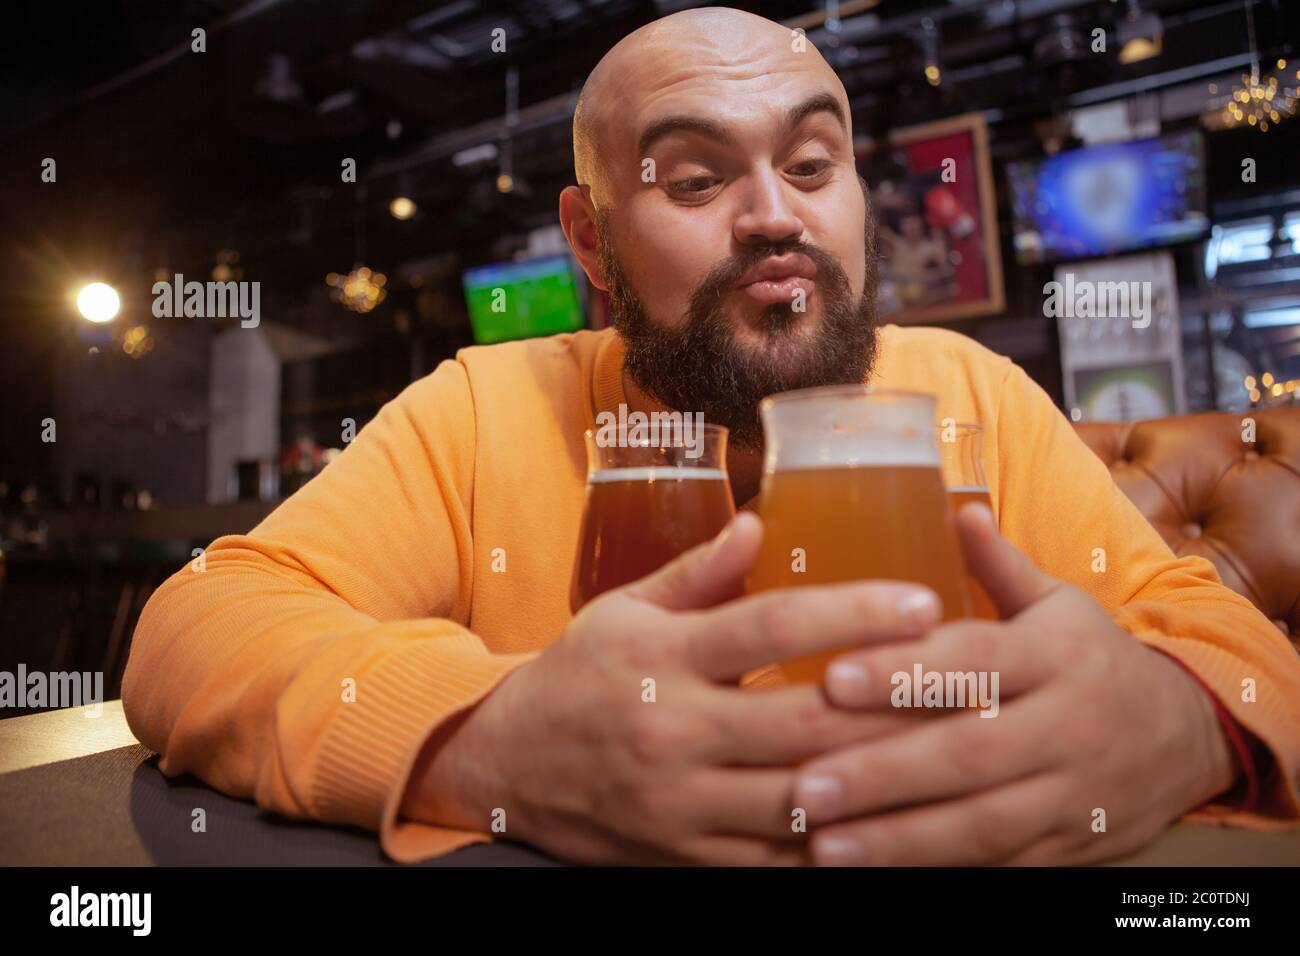 Funny bearded man blowing kisses towards his beer glasses, copy space. Alcohol love, craft beer concept Stock Photo